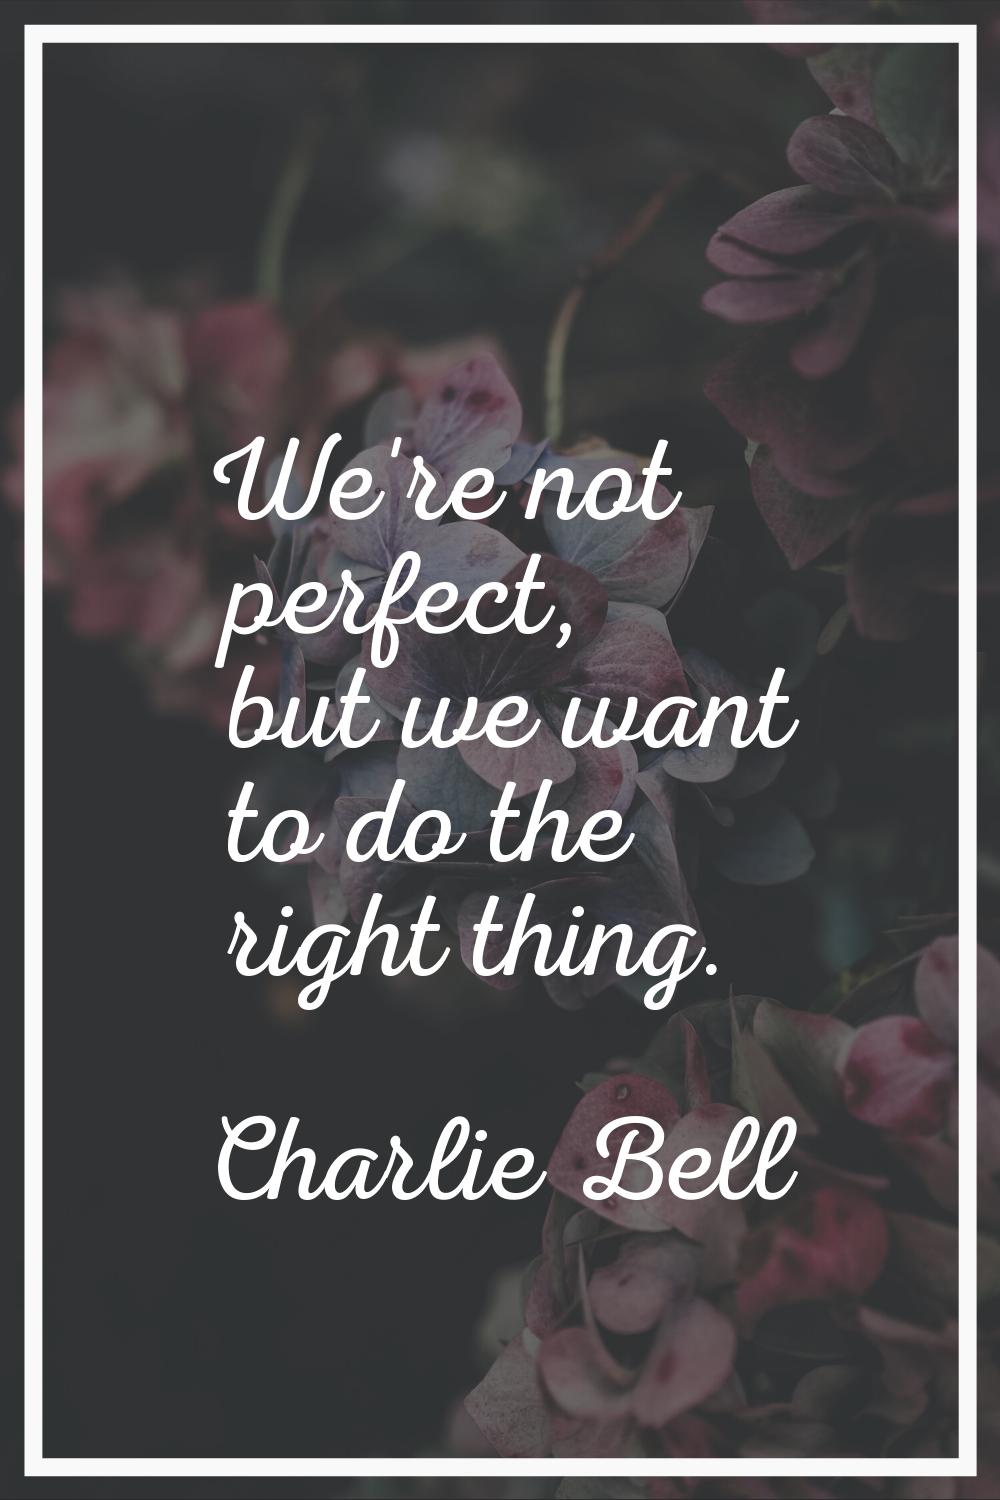 We're not perfect, but we want to do the right thing.